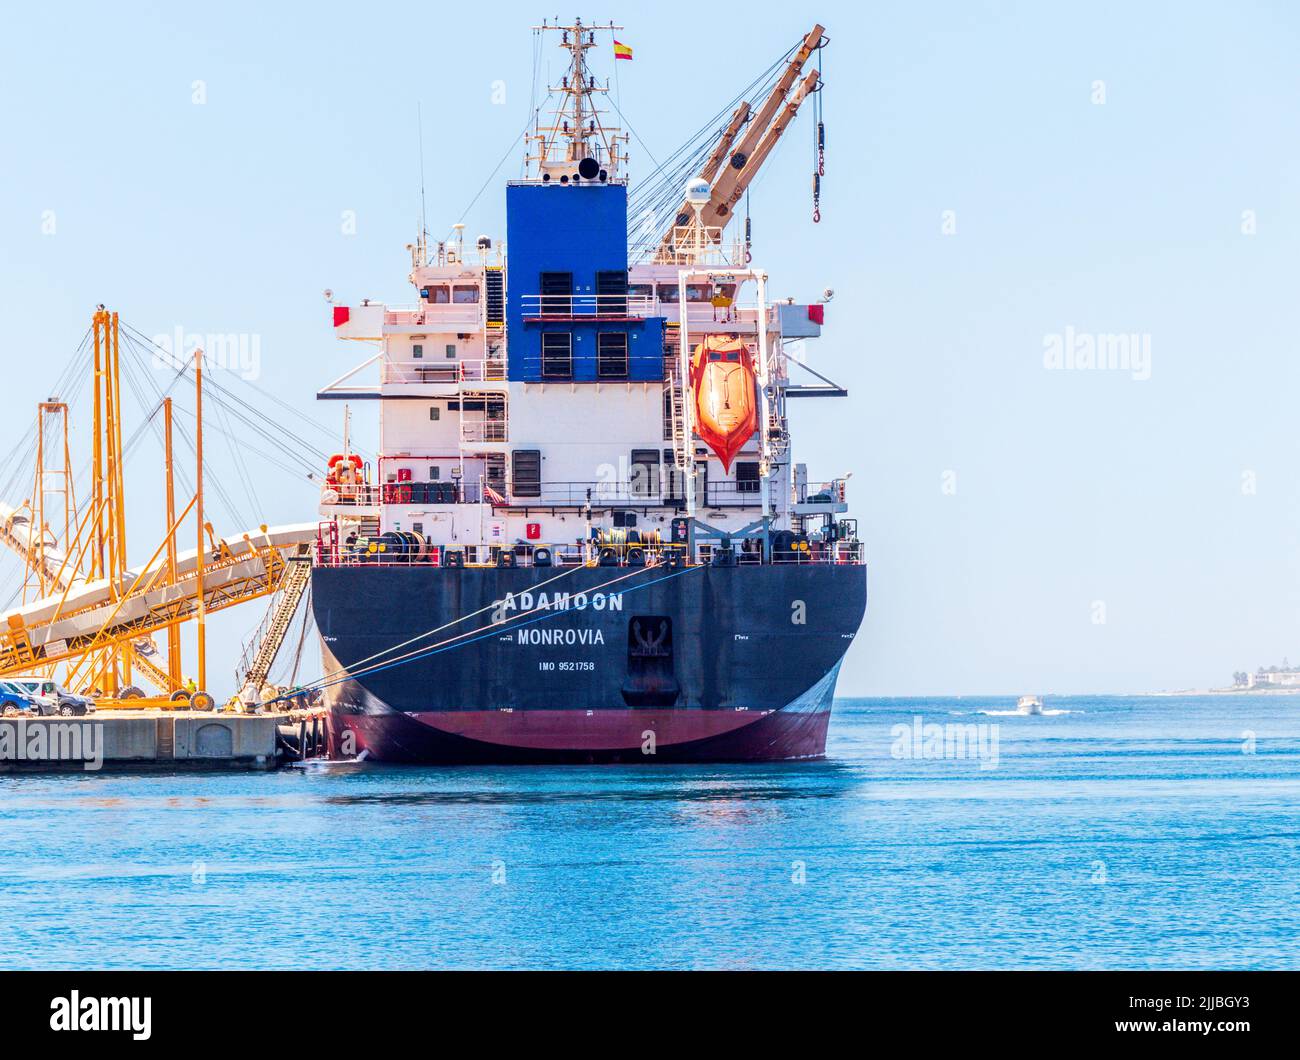 Adamoon Bulk Carrier being Loaded with Gypsum at the Port of Garrucha Almeria province, Andalucía, Spain Stock Photo